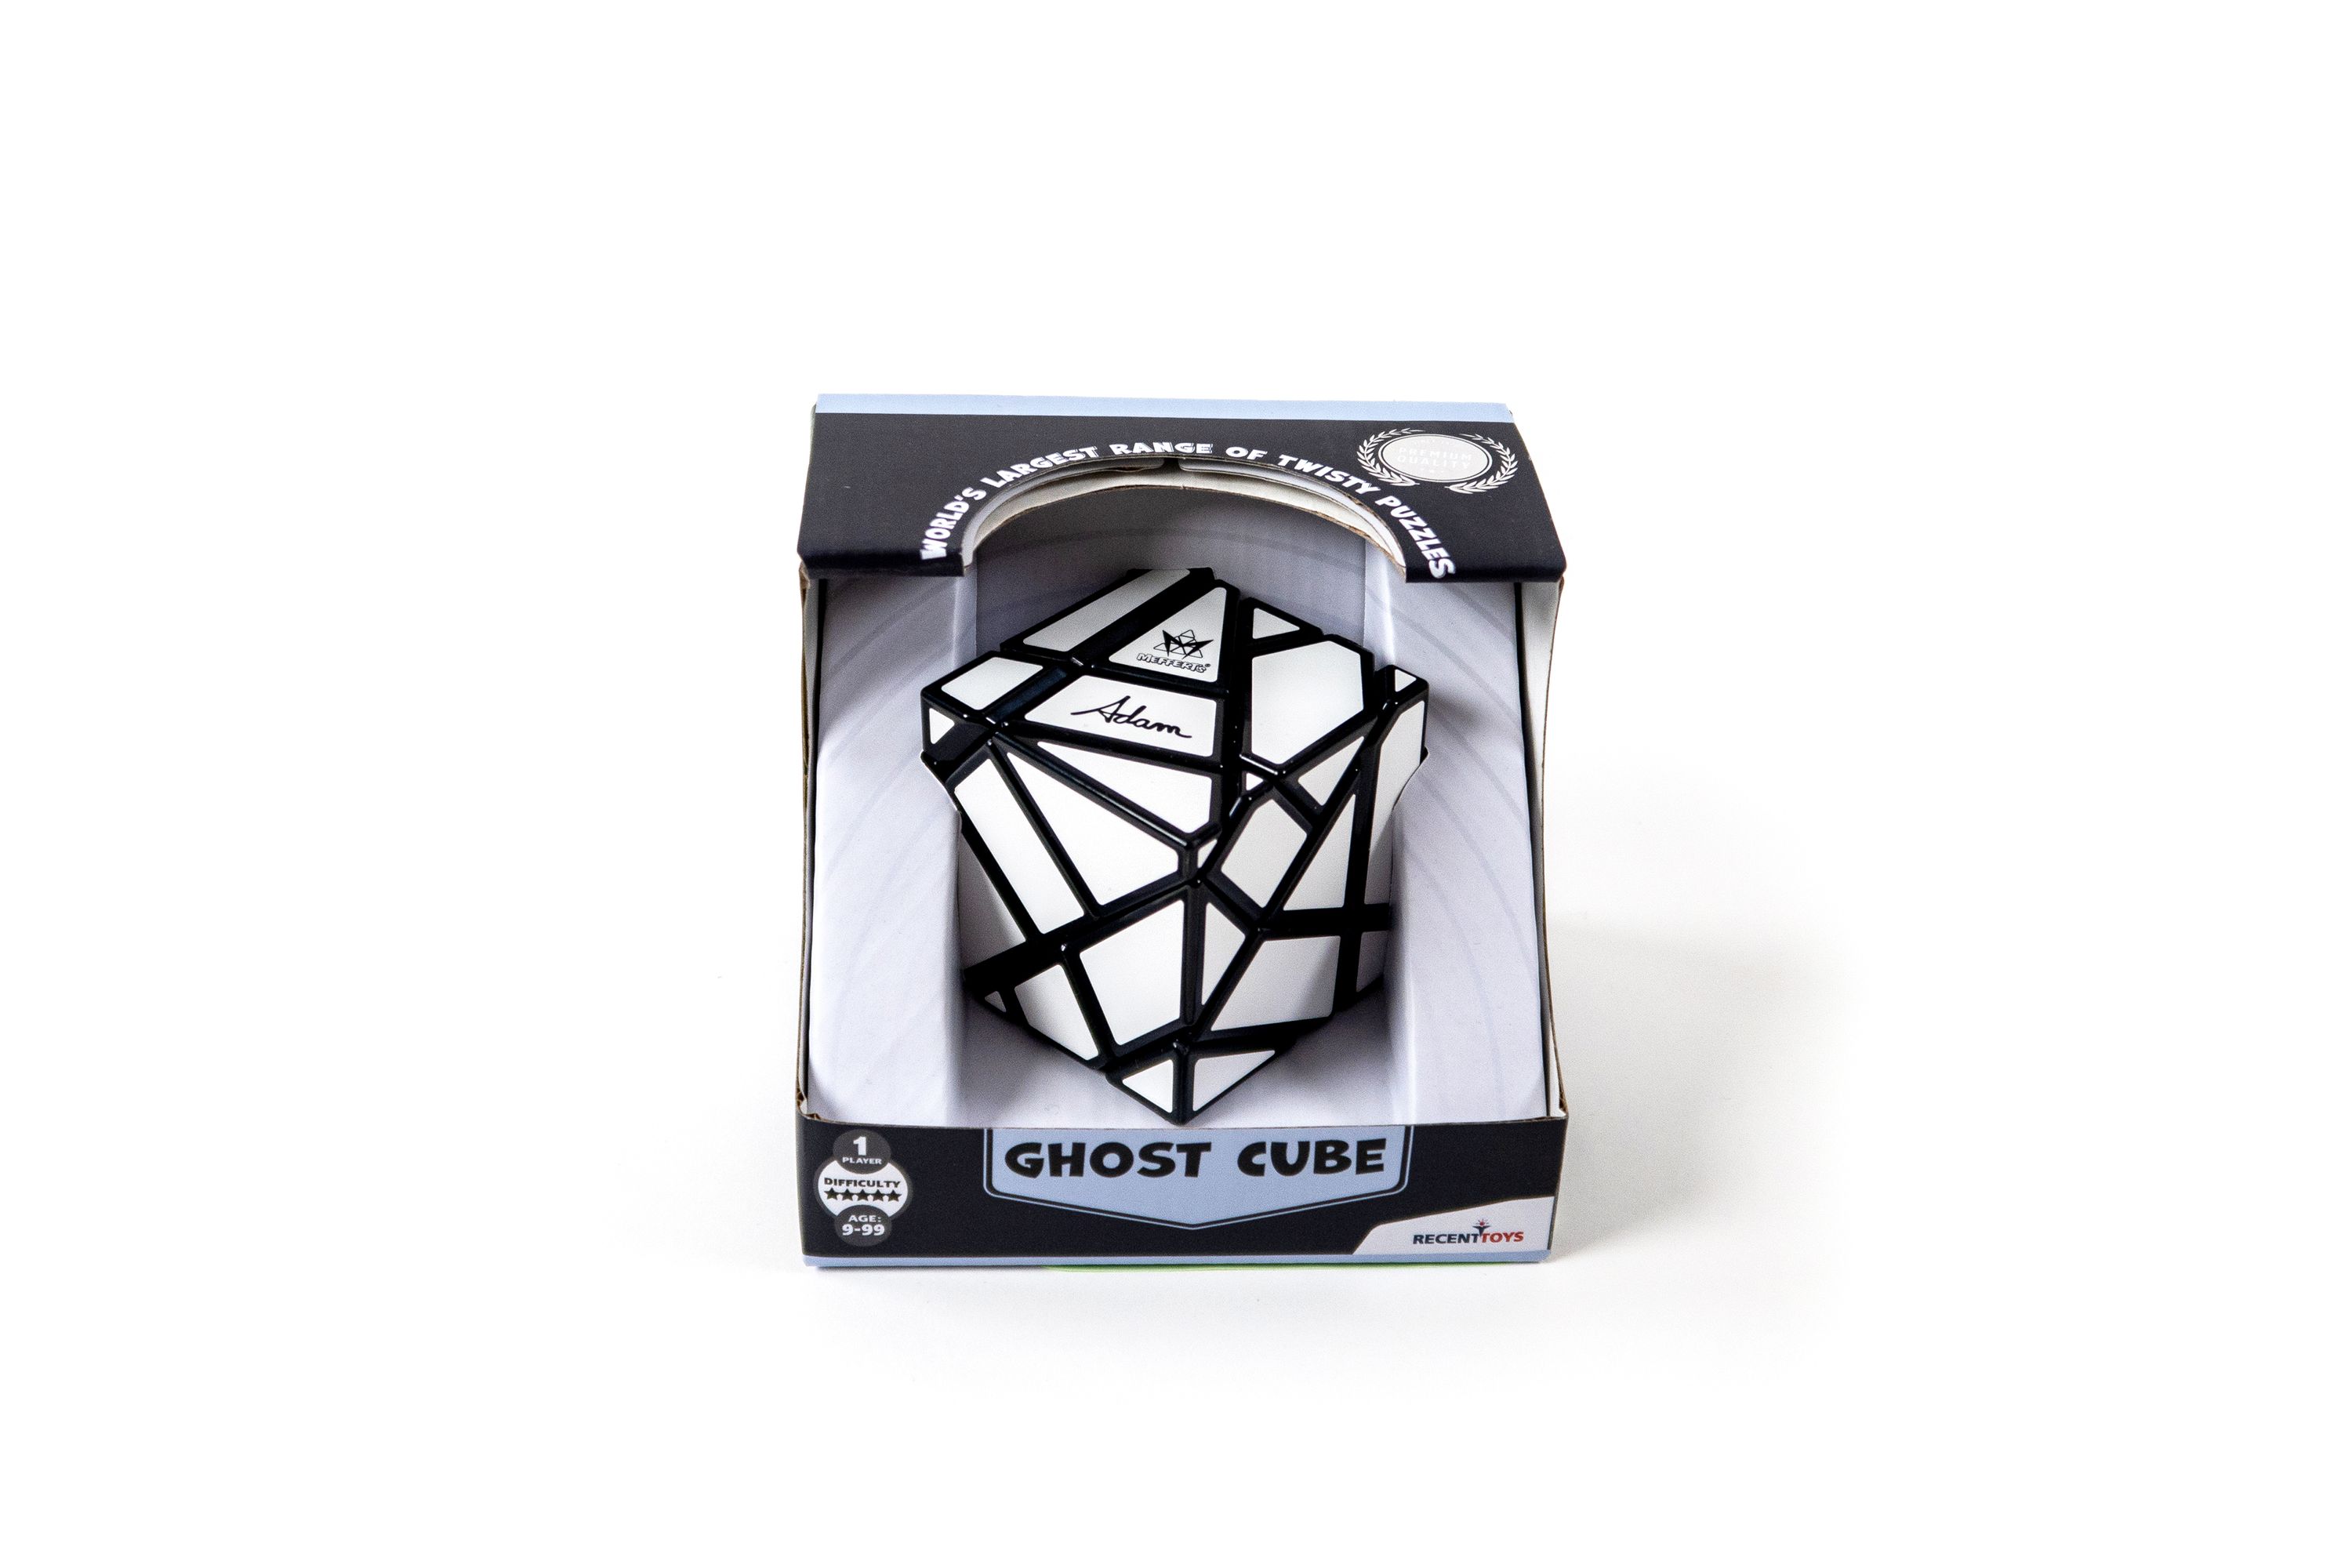 RECENT TOYS  Galvosūkis GHOST CUBE